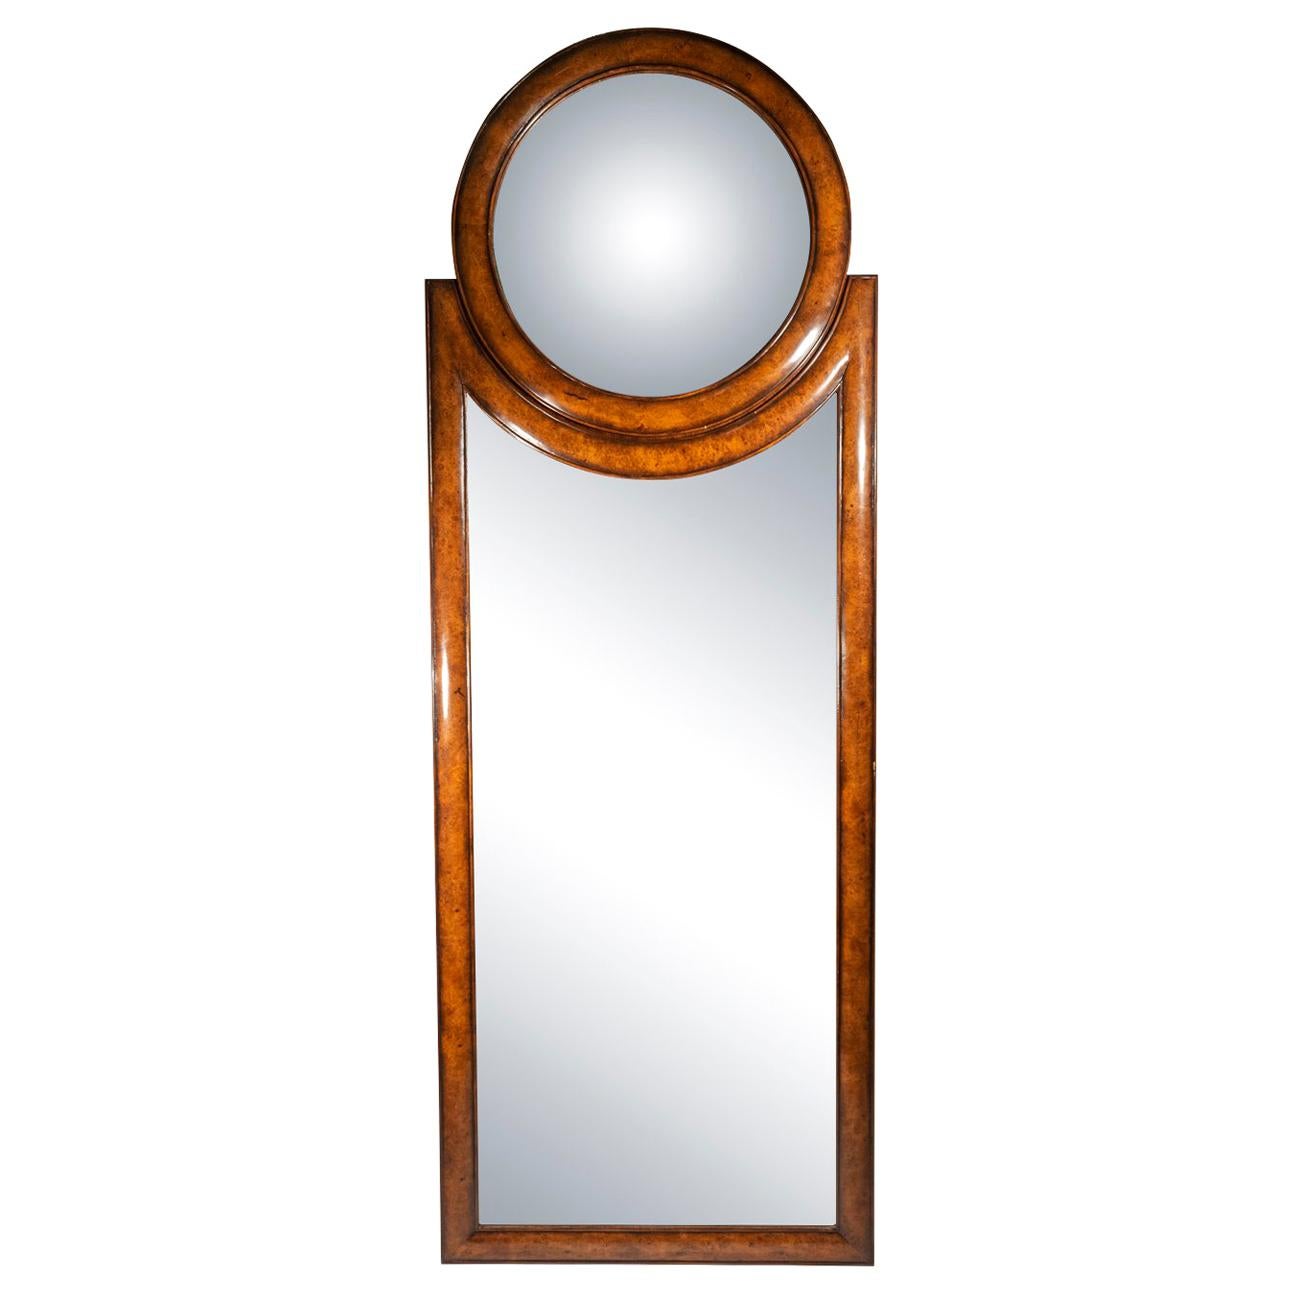 In the style of Emilio Terry, 
Pair of Mirrors, 
Glass, wood and convex mirror,
France, circa 1950.

Measures: Height 244 cm, width 87 cm, depth 3 cm.